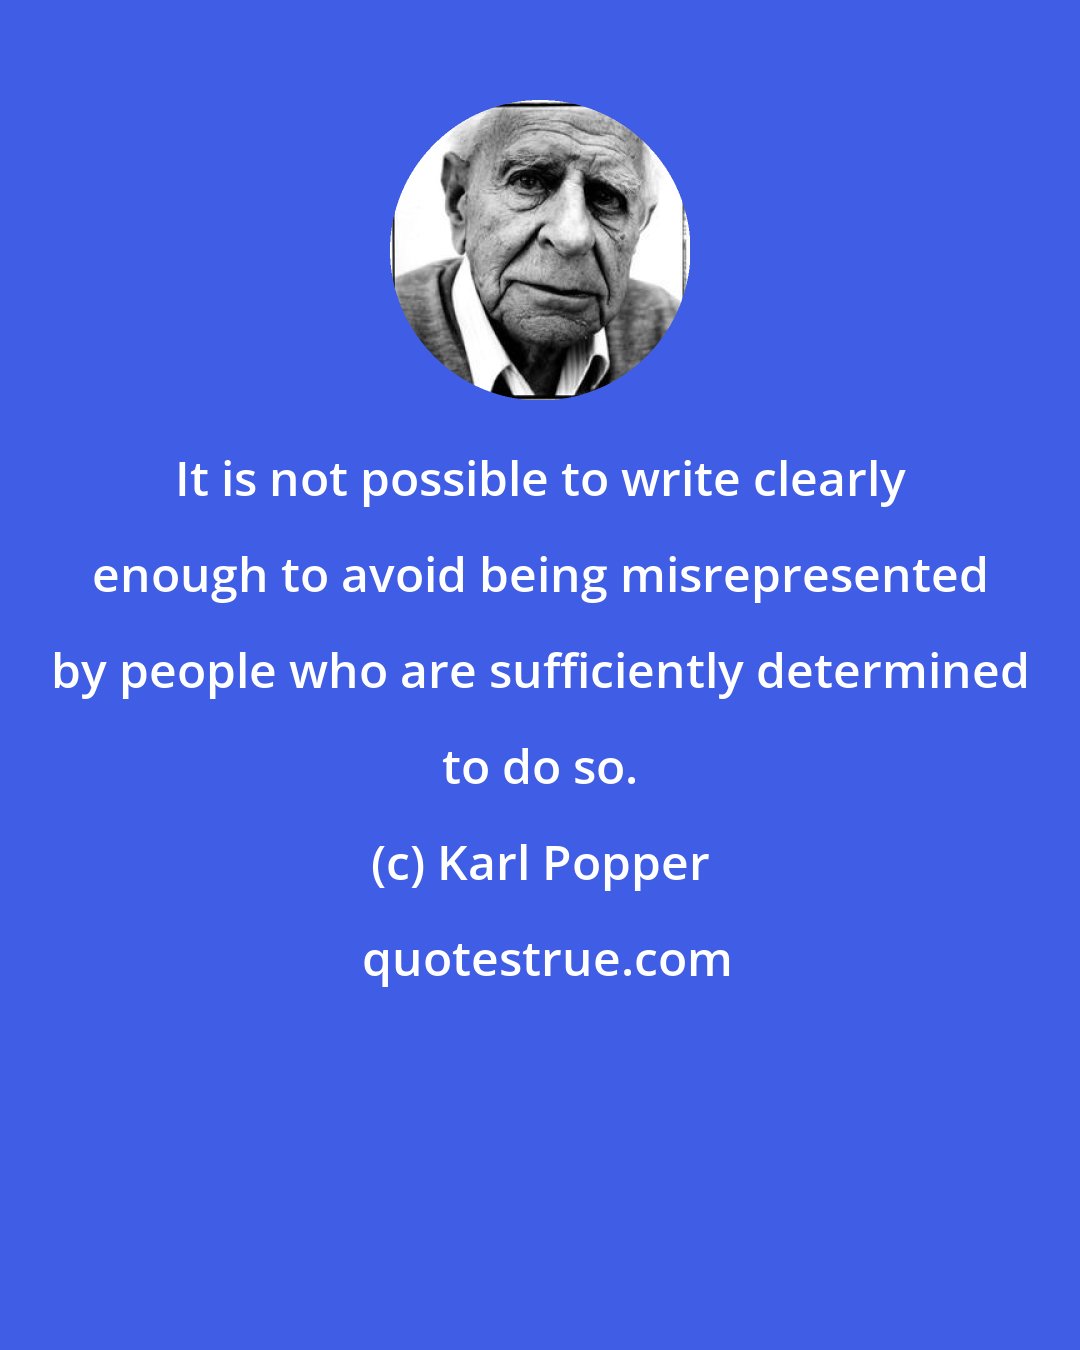 Karl Popper: It is not possible to write clearly enough to avoid being misrepresented by people who are sufficiently determined to do so.